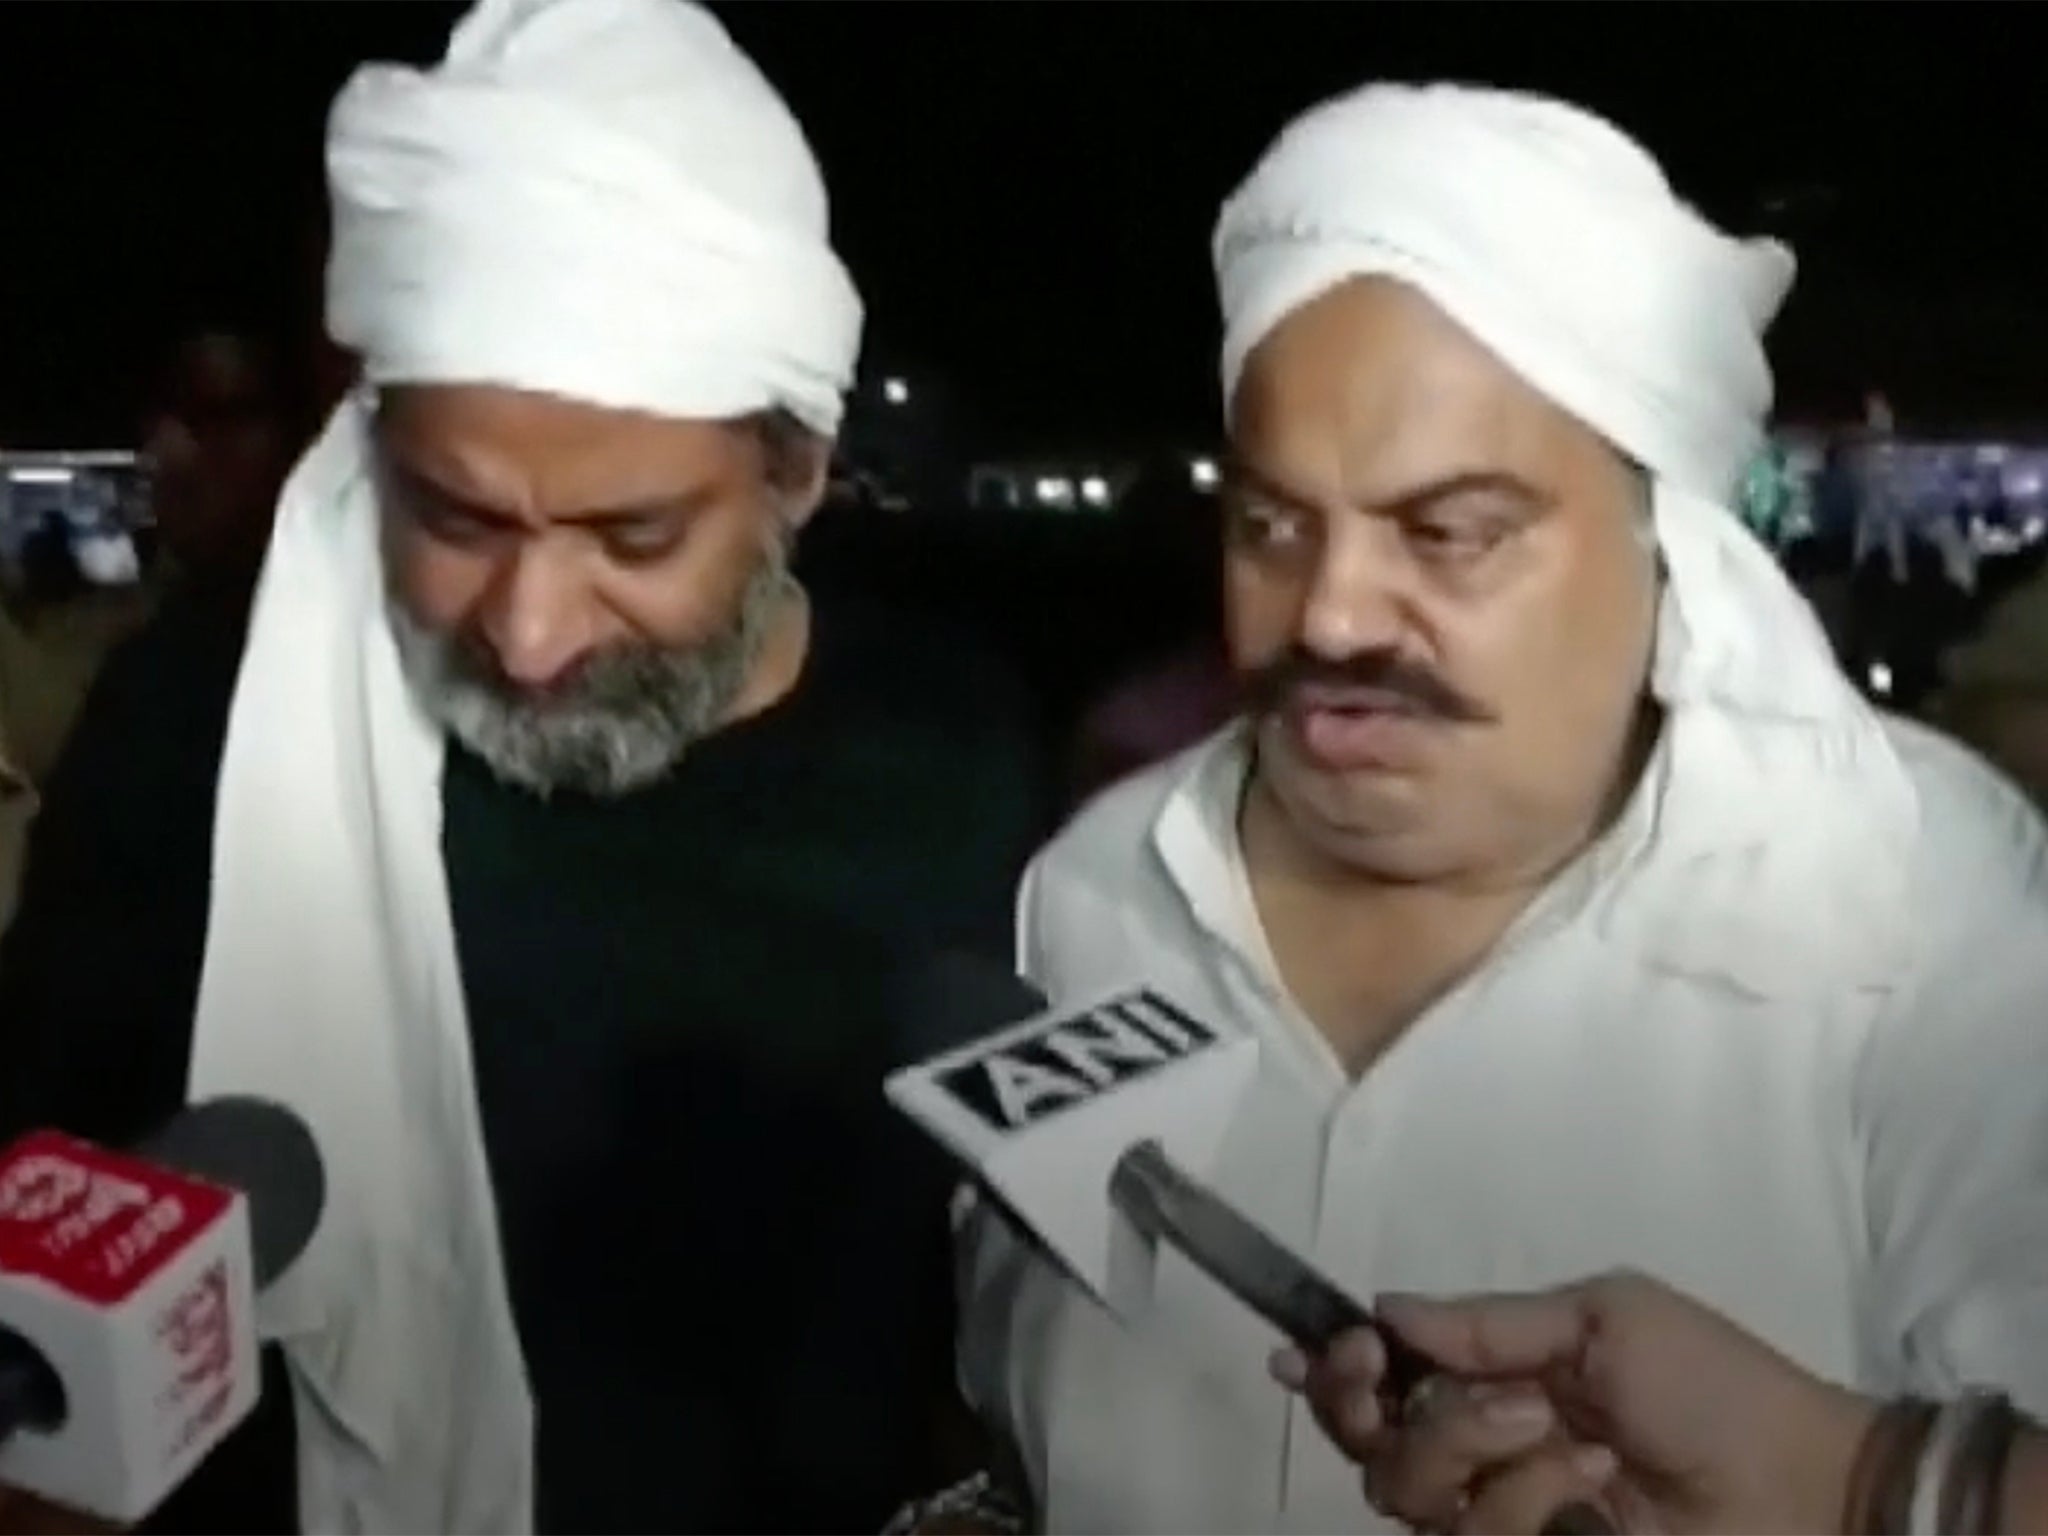 Atiq Ahmed [right] and his brother Ashraf being interviewed by reporters on their way to a medical checkup moments before they were killed